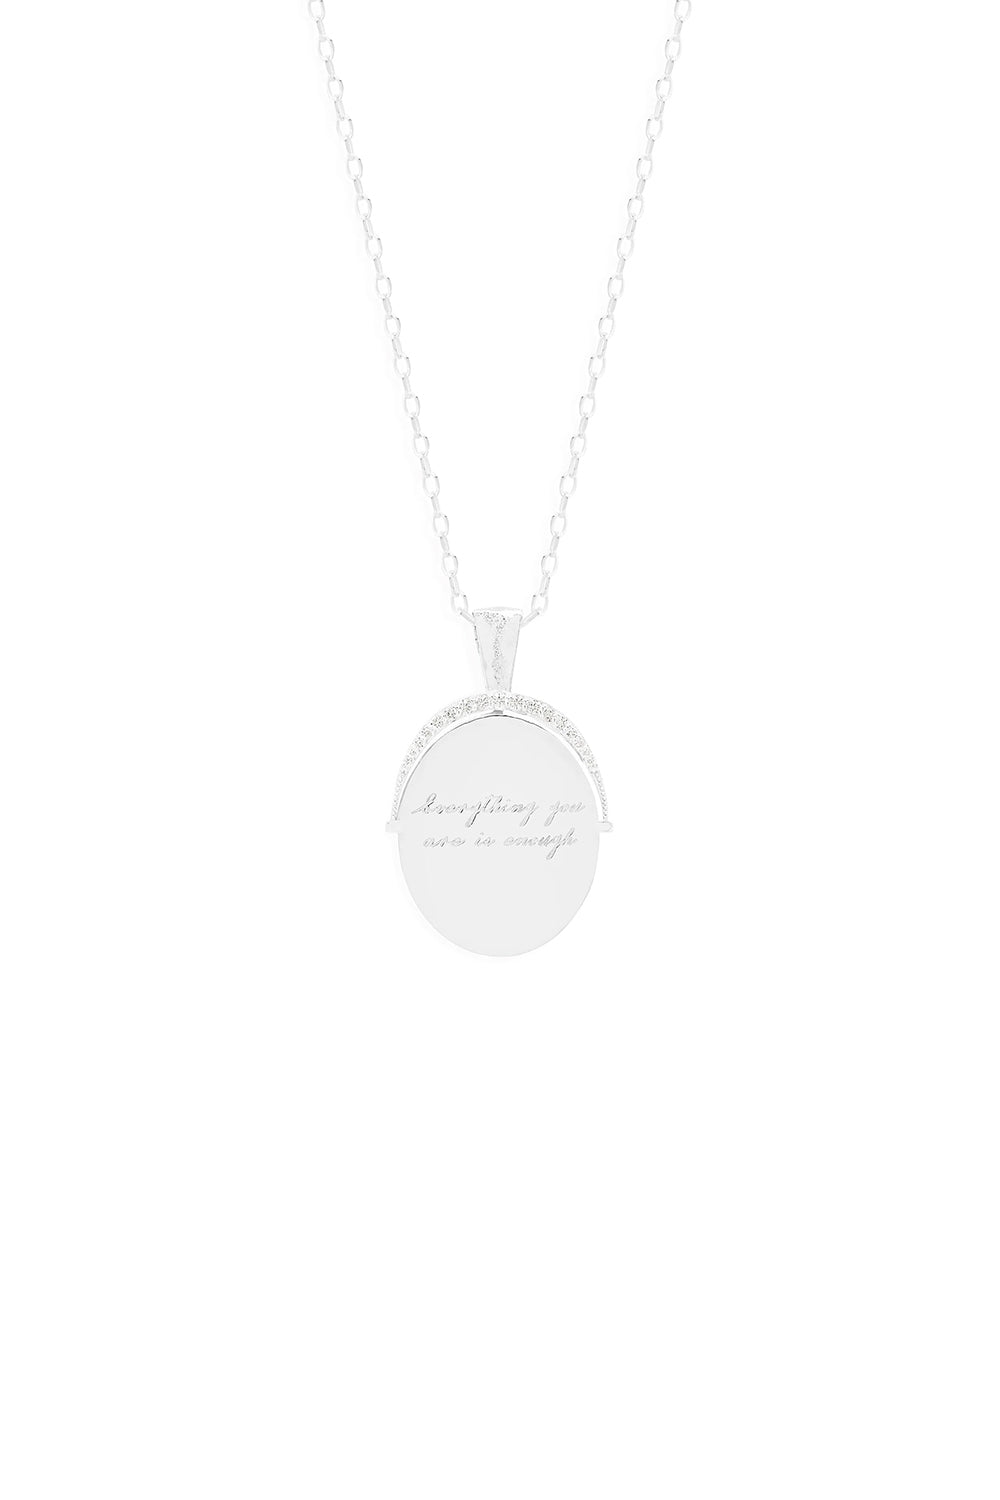 Everything You Are is Enough Small Necklace - Silver